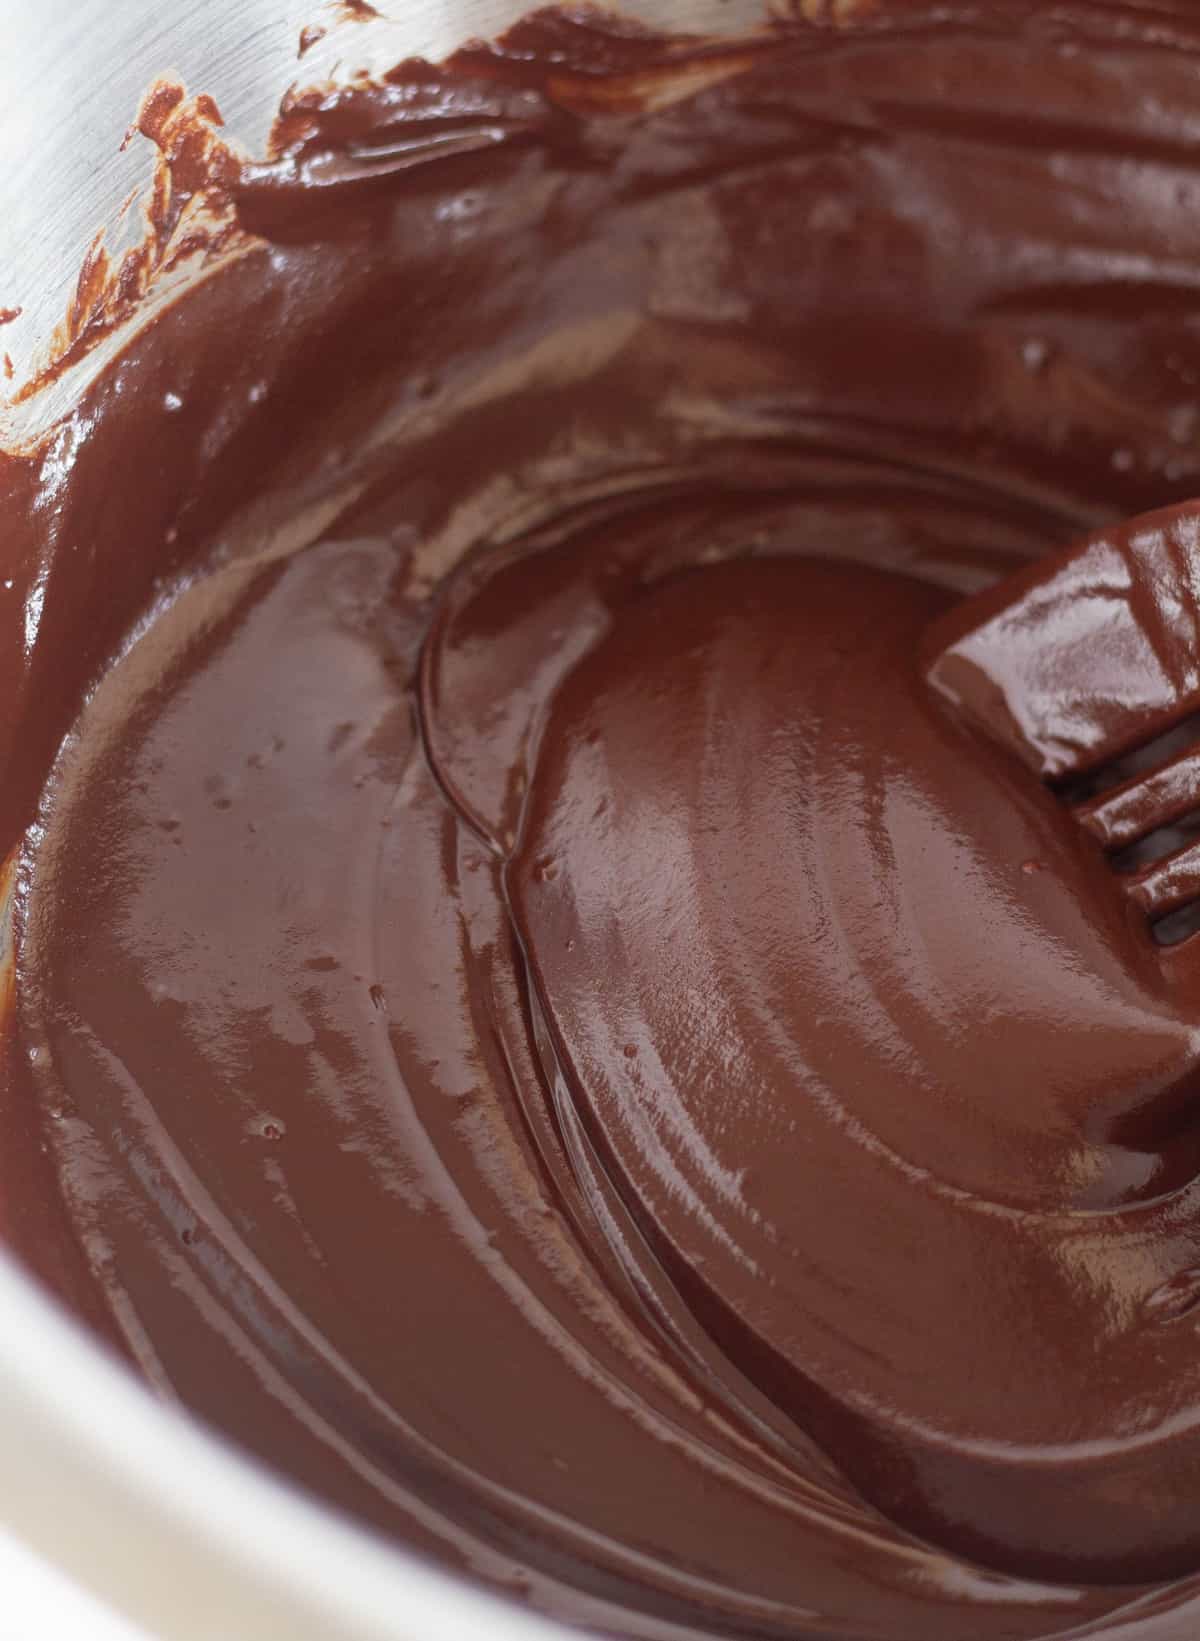 melted chocolate mixture in bowl